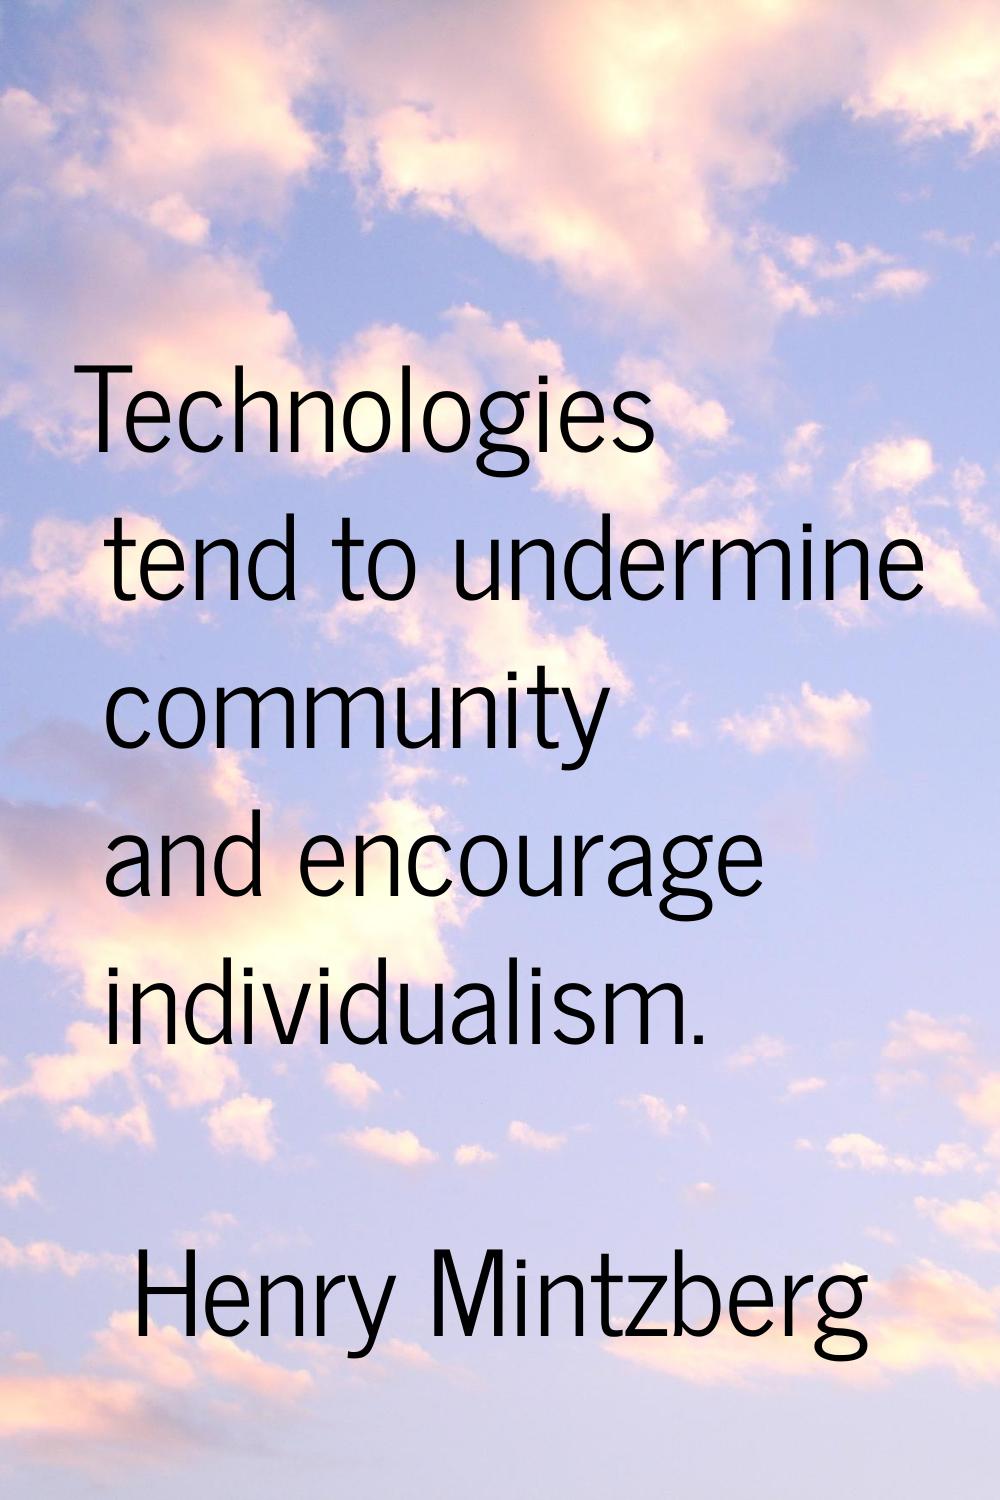 Technologies tend to undermine community and encourage individualism.